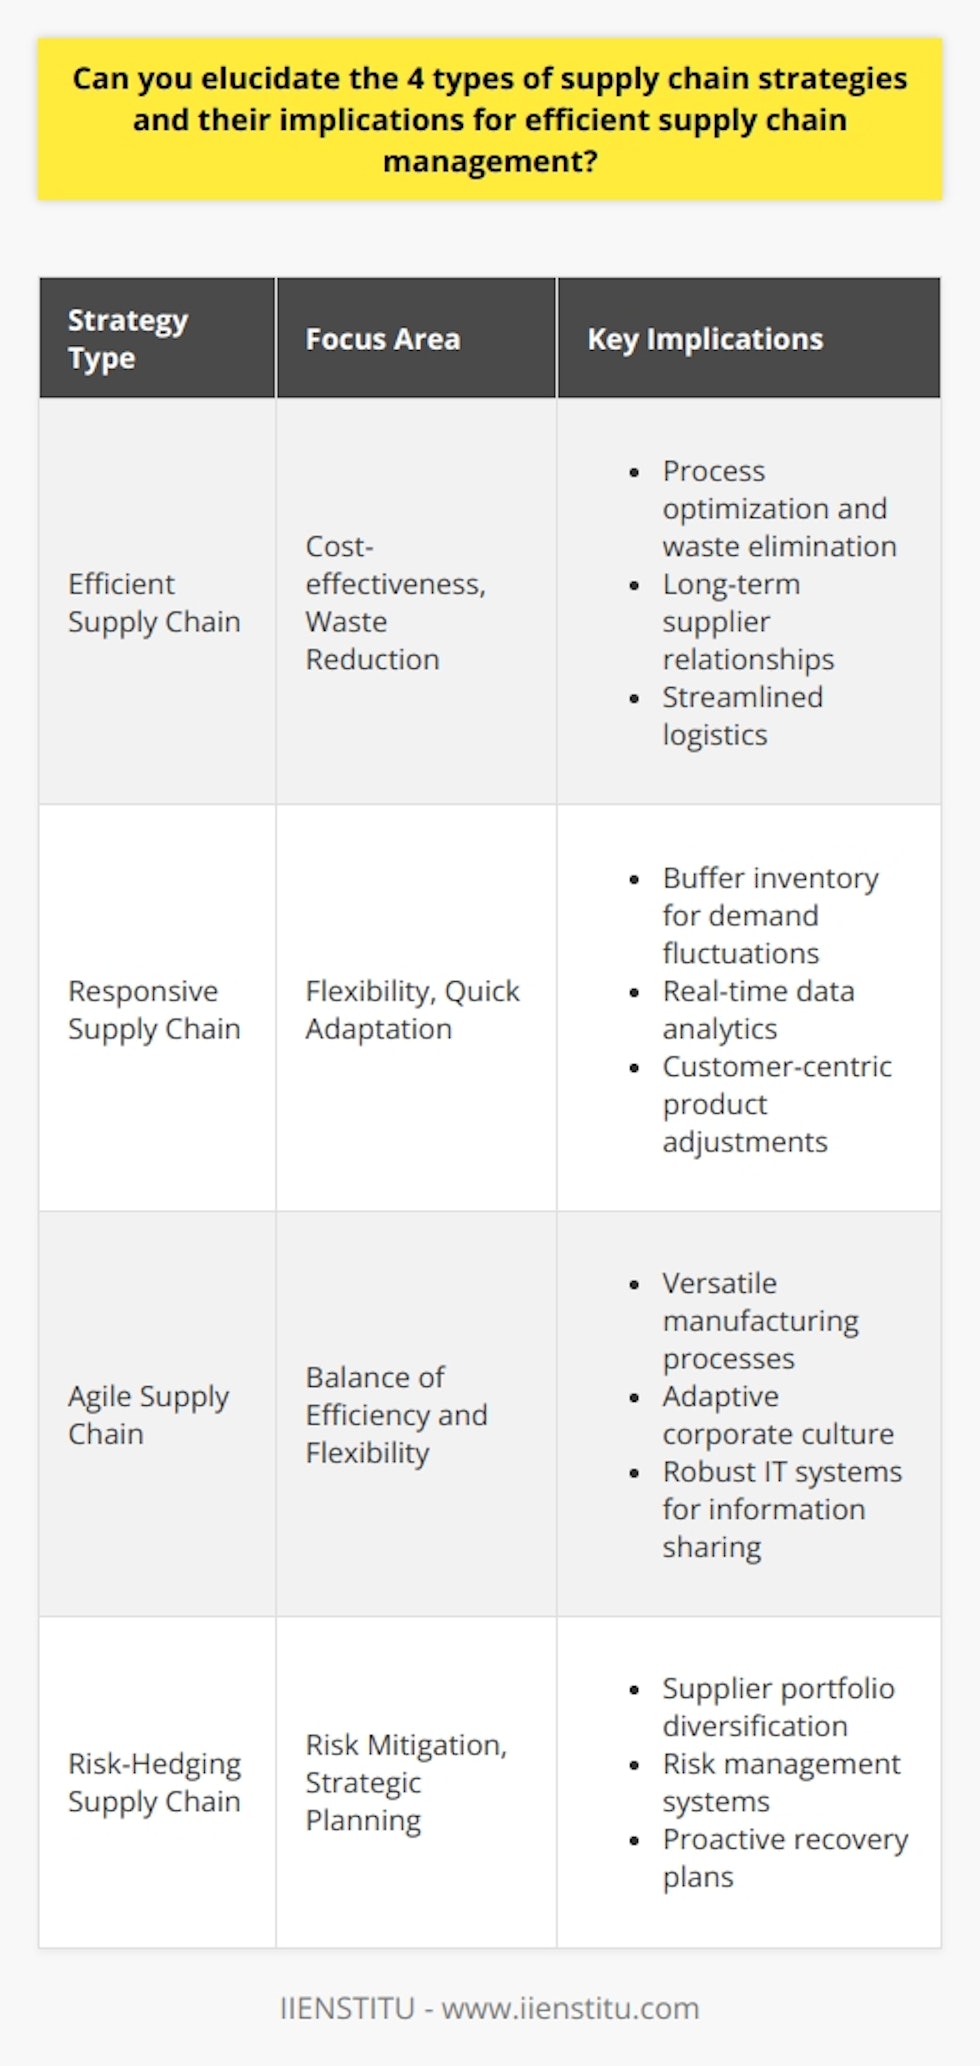 Supply chain management is a multifaceted and nuanced field, requiring strategies that align with a company’s business model and market demands. As organizations strive for optimization, they usually gravitate towards one or more of the four foundational supply chain strategies: efficient, responsive, agile, and risk-hedging. Each strategy comes with its own set of procedures and goals, requiring distinct resources and capabilities.1. Efficient Supply Chain StrategyAn efficient supply chain strategy is particularly favored in markets characterized by high levels of supply and demand stability. Companies that leverage efficiency as their core strategy focus on creating the most cost-effective supply chain possible by reducing waste and non-value-added activities. This might involve bulk production, high facility utilization rates, and tight inventory control, all underpinned by strong forecasting capabilities. Efficiency-driven companies often focus on commodities or staple goods, where the cost plays a pivotal role in the purchasing decision.Implications of this strategy include:- Prioritizing process optimization and waste elimination.- Building long-term supplier relationships for cost-effective raw material procurement.- Streamlining logistics to minimize transportation and storage expenses.2. Responsive Supply Chain StrategyThe responsive supply chain strategy is designed for markets that experience high volatility, where being able to quickly react to changing demands is a competitive advantage. Fast fashion and technology sectors are typical domains where responsiveness is paramount due to short product life cycles and evolving consumer preferences. This strategy emphasizes flexibility, quick turnaround times, and the ability to adapt to the market landscape.Key implications for companies adopting this strategy encompass:- Maintaining a buffer of inventory to quickly serve fluctuating demands.- Using advanced technologies for real-time data analytics and supply chain visibility.- Fostering a customer-centric approach to rapidly adjust to consumer needs.3. Agile Supply Chain StrategyAgility builds upon the strengths of both efficient and responsive strategies by seeking a balance between cost-effectiveness and flexibility. Companies that pursue an agile supply chain must adjust quickly to market dynamics without forfeiting efficiency. This requires a robust and adaptable infrastructure, capable of responding swiftly to both short-term changes and long-term shifts in the industry.Companies focusing on agility must consider:- Implementing a versatile manufacturing process accommodating both customization and volume.- Fostering an adaptive corporate culture committed to continuous improvement.- Developing robust IT systems to facilitate the sharing of information across the supply chain.4. Risk-Hedging Supply Chain StrategyRisk-hedging supply chains are constructed to anticipate and mitigate potential disruptions and risks, including supplier instability, geopolitical factors, and natural disasters. These risks could compromise the integrity and functionality of the supply chain, thereby necessitating strategic foresight and planning. This is especially relevant in industries with high stakes, such as pharmaceuticals.Implementing a risk-hedging strategy involves:- Diversifying the supplier portfolio to avoid single points of failure.- Investing in risk management and compliance systems.- Creating proactive recovery and contingency plans to address potential supply chain disruptions.Understanding and integrating these strategies are essential for enterprises that wish to optimize their supply chain operations. Businesses must assess their market environment, product nature, and consumer expectations to select and tailor the most suitable supply chain strategy. In doing so, they can enhance their resilience, efficiency, and customer satisfaction, ultimately securing their competitive position in the marketplace.